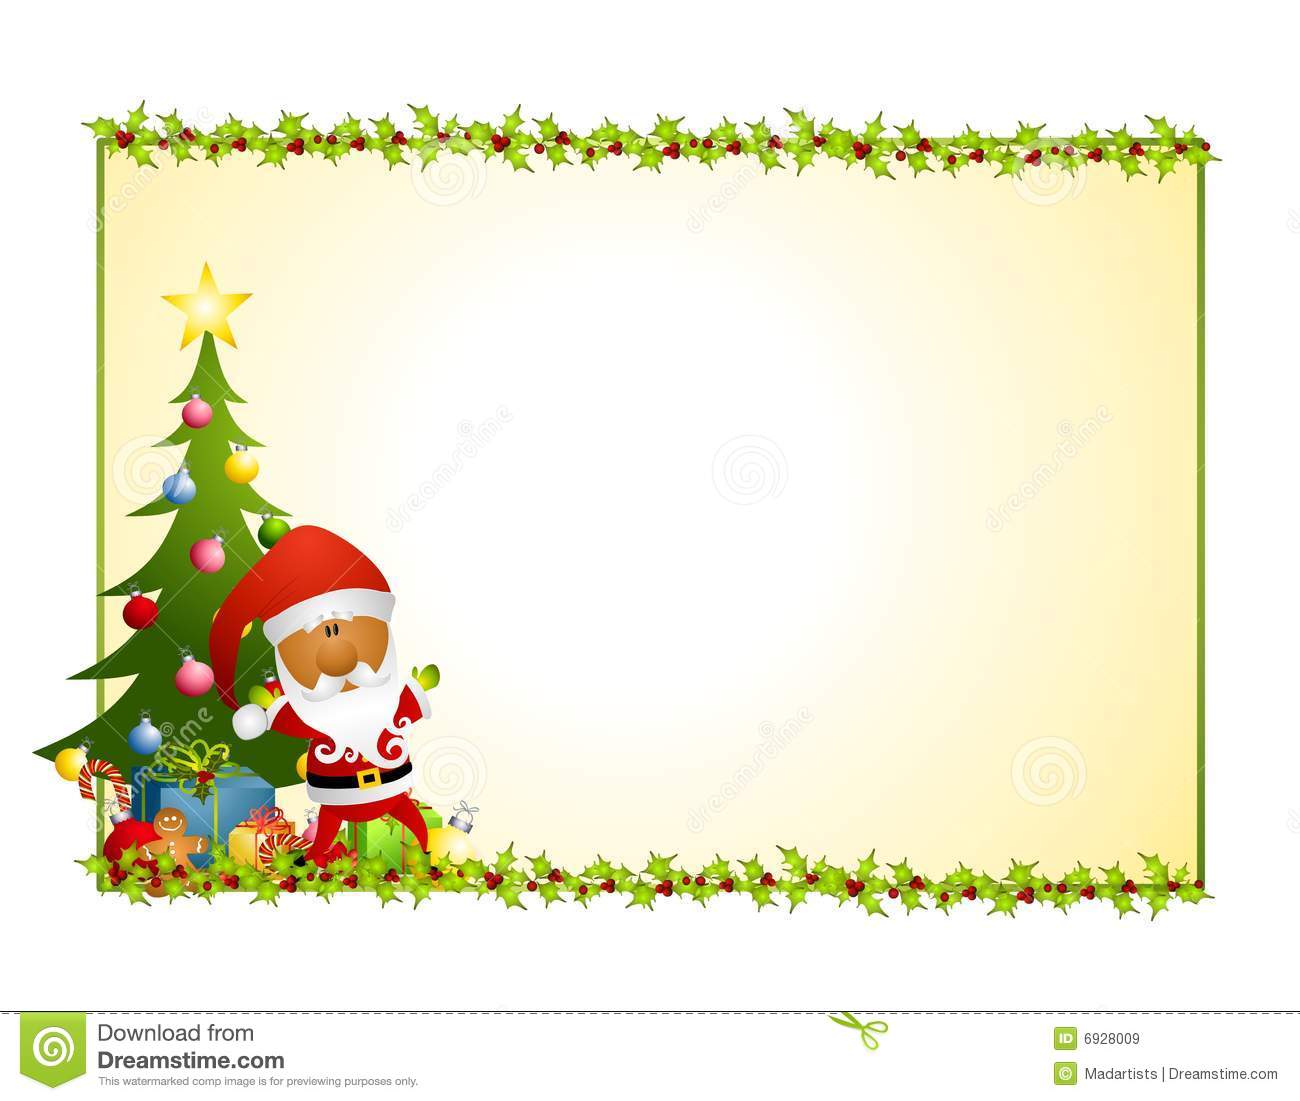 Santa Claus Holly Background 2 Royalty Free Stock Images   Image